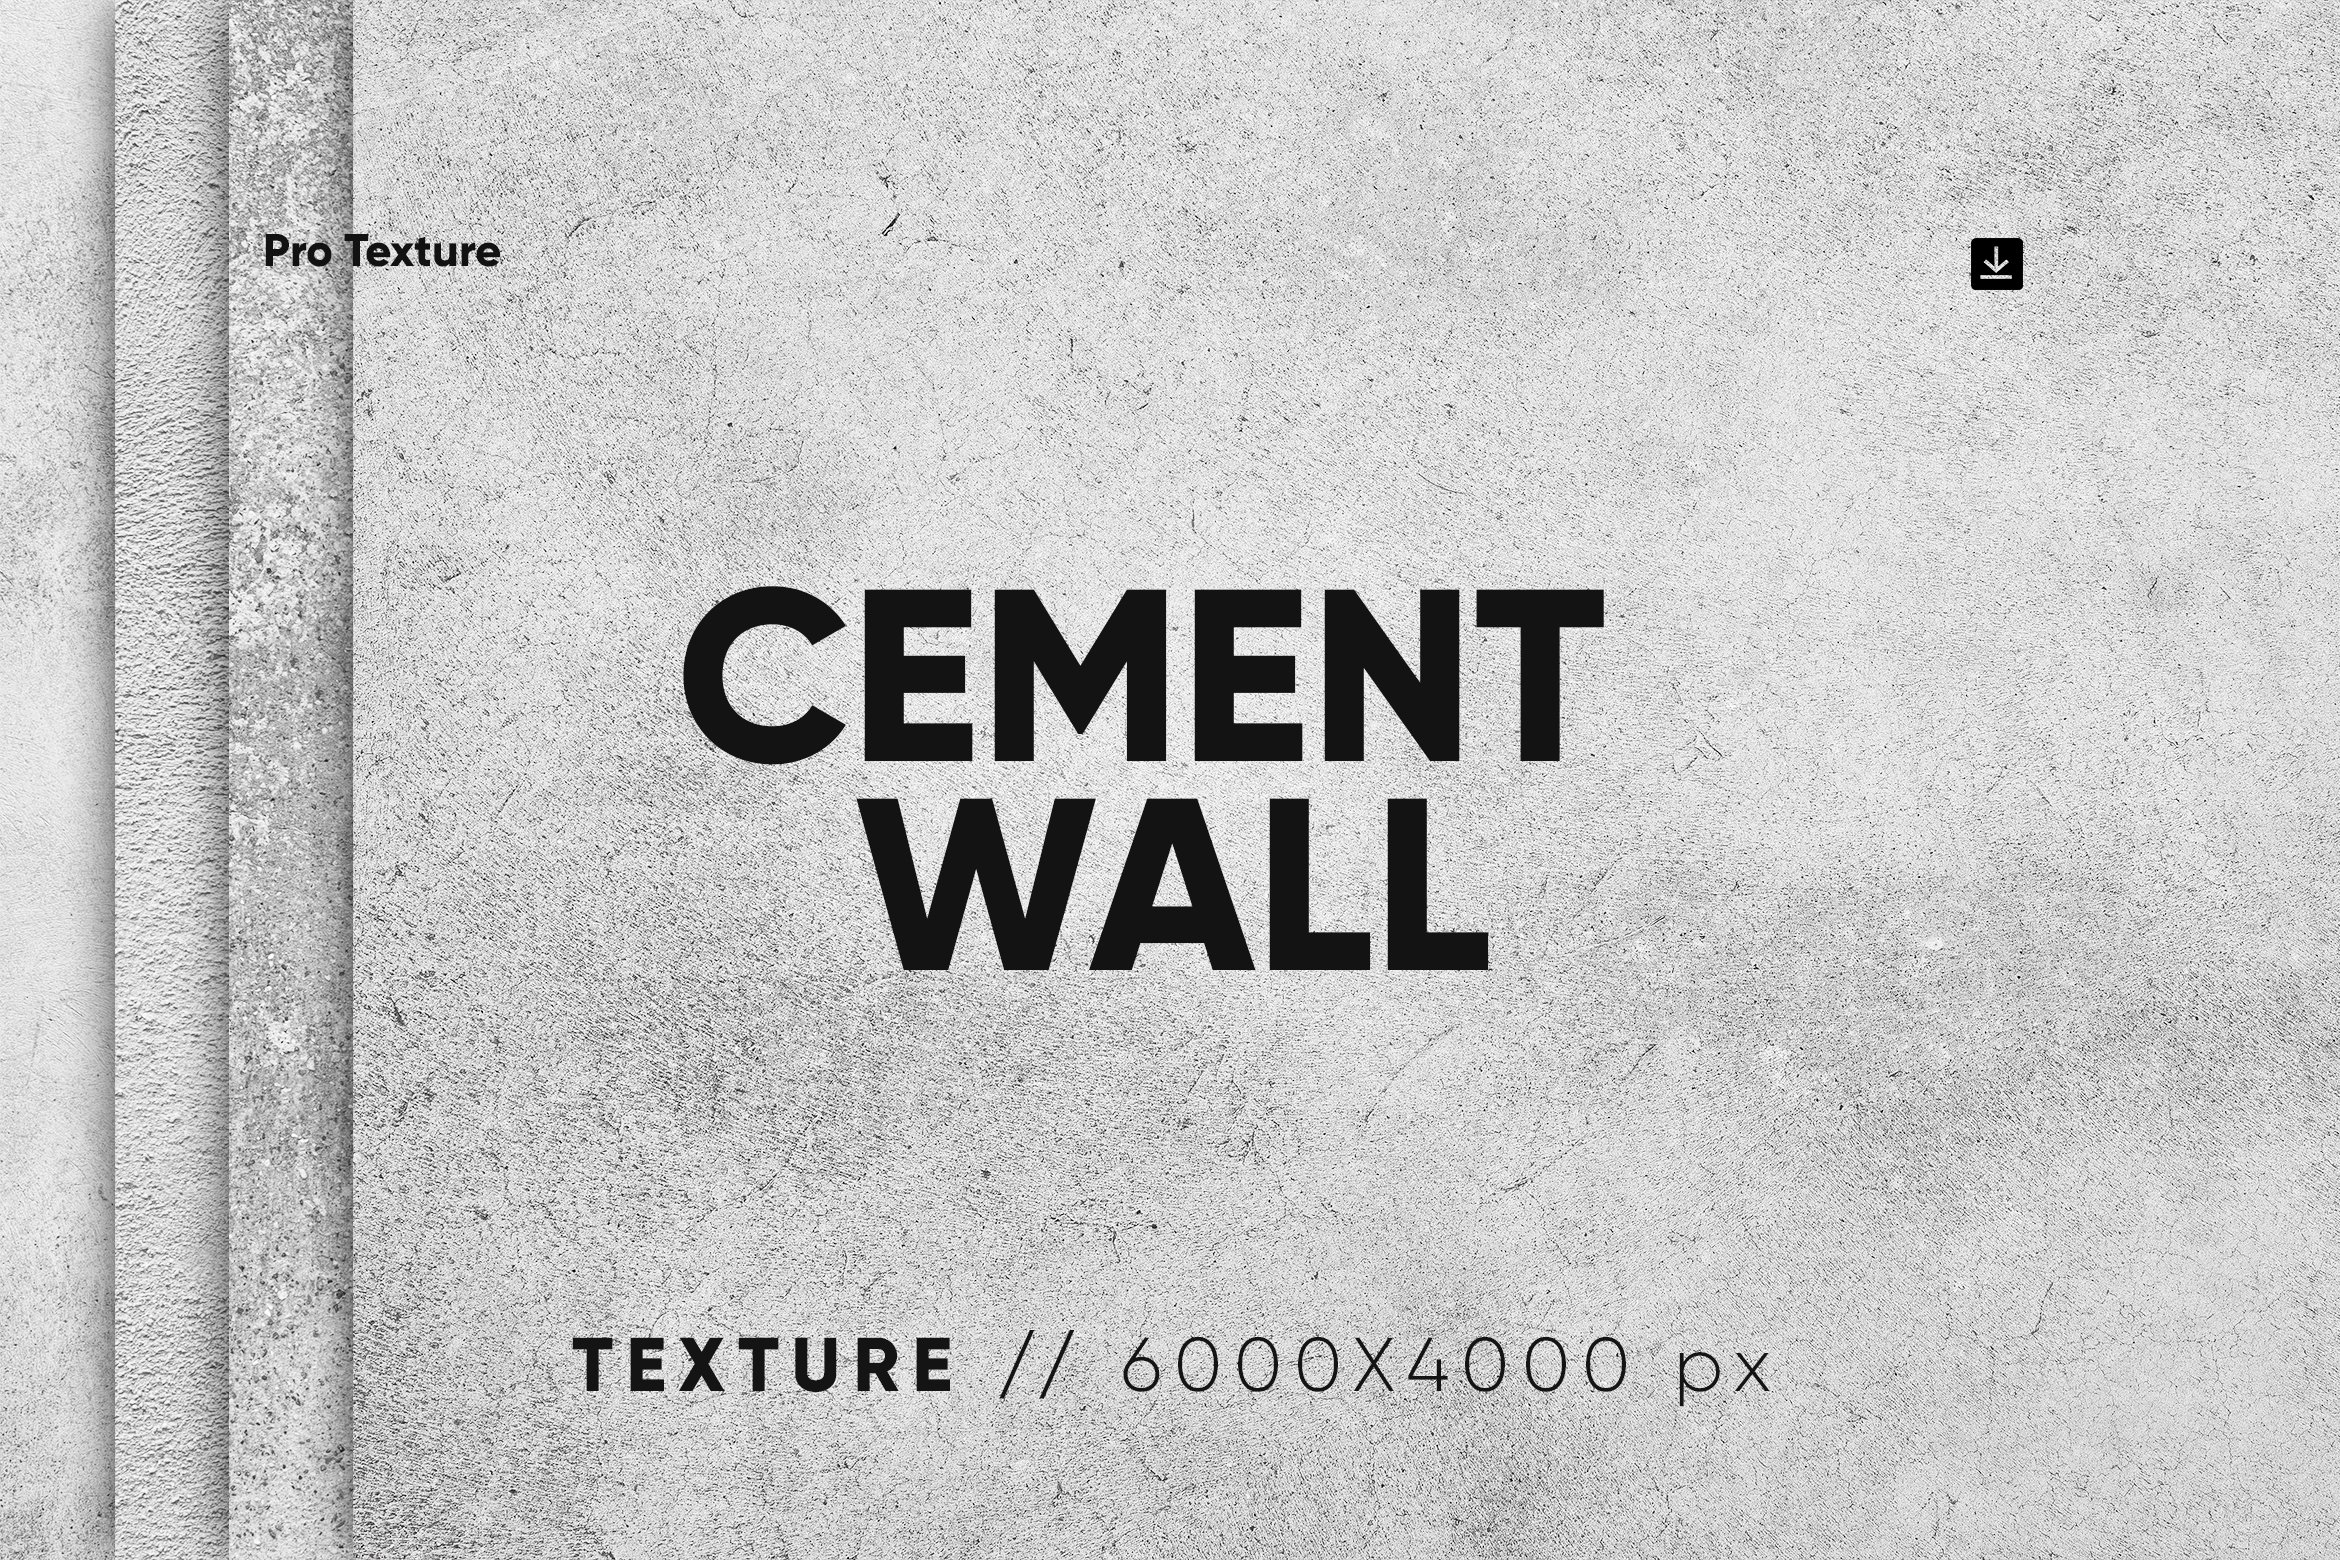 20 Cement Wall Texture HQ cover image.